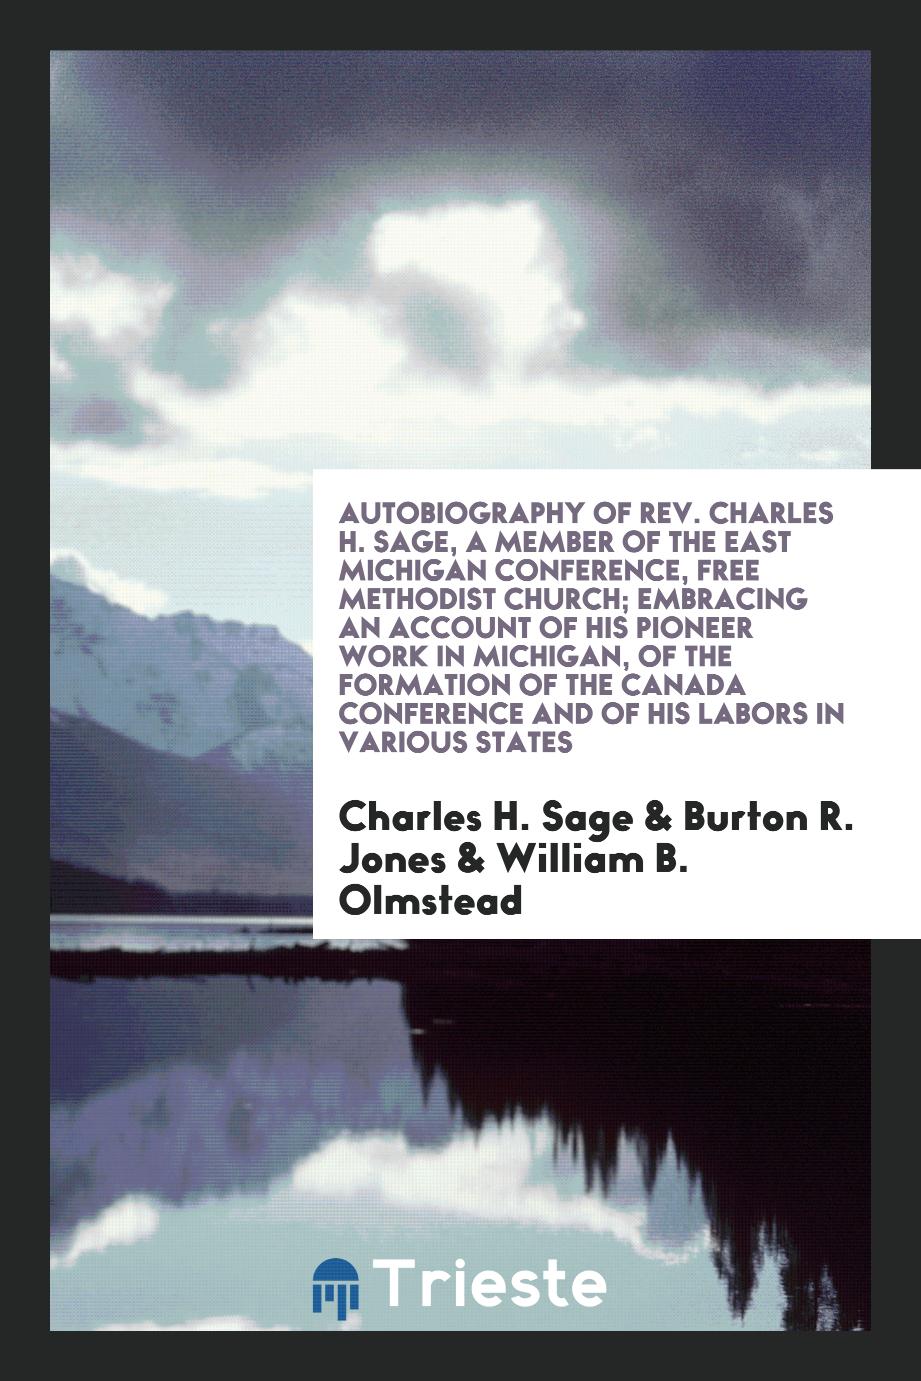 Autobiography of Rev. Charles H. Sage, a Member of the East Michigan Conference, Free Methodist Church; Embracing an Account of His Pioneer Work in Michigan, of the Formation of the Canada Conference and of His Labors in Various States